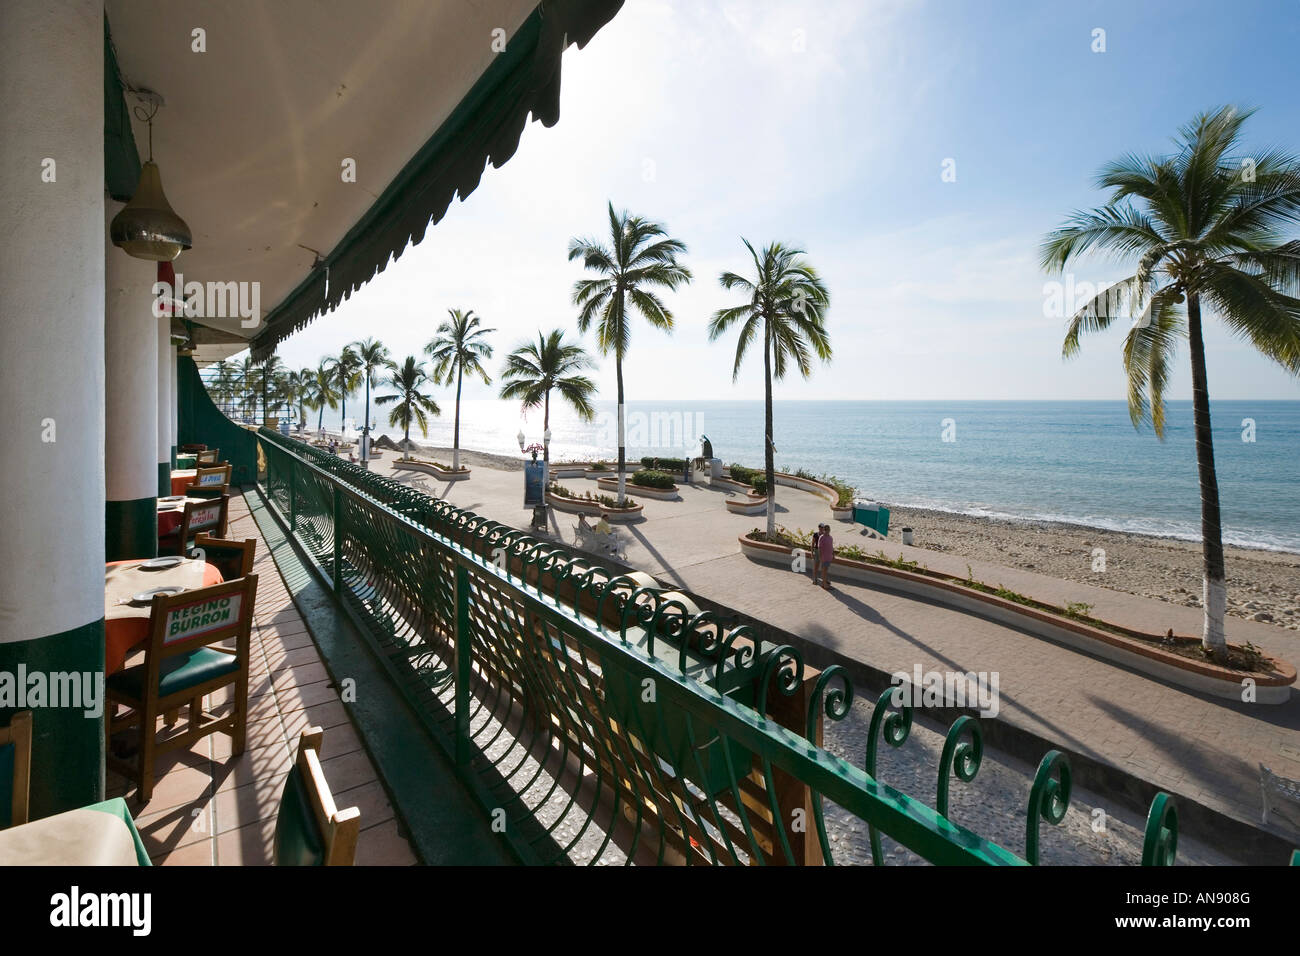 View from Terrace of Seafront Restaurant, Malecon, Old Town, Puerto Vallarta, Jalisco, Mexico Stock Photo